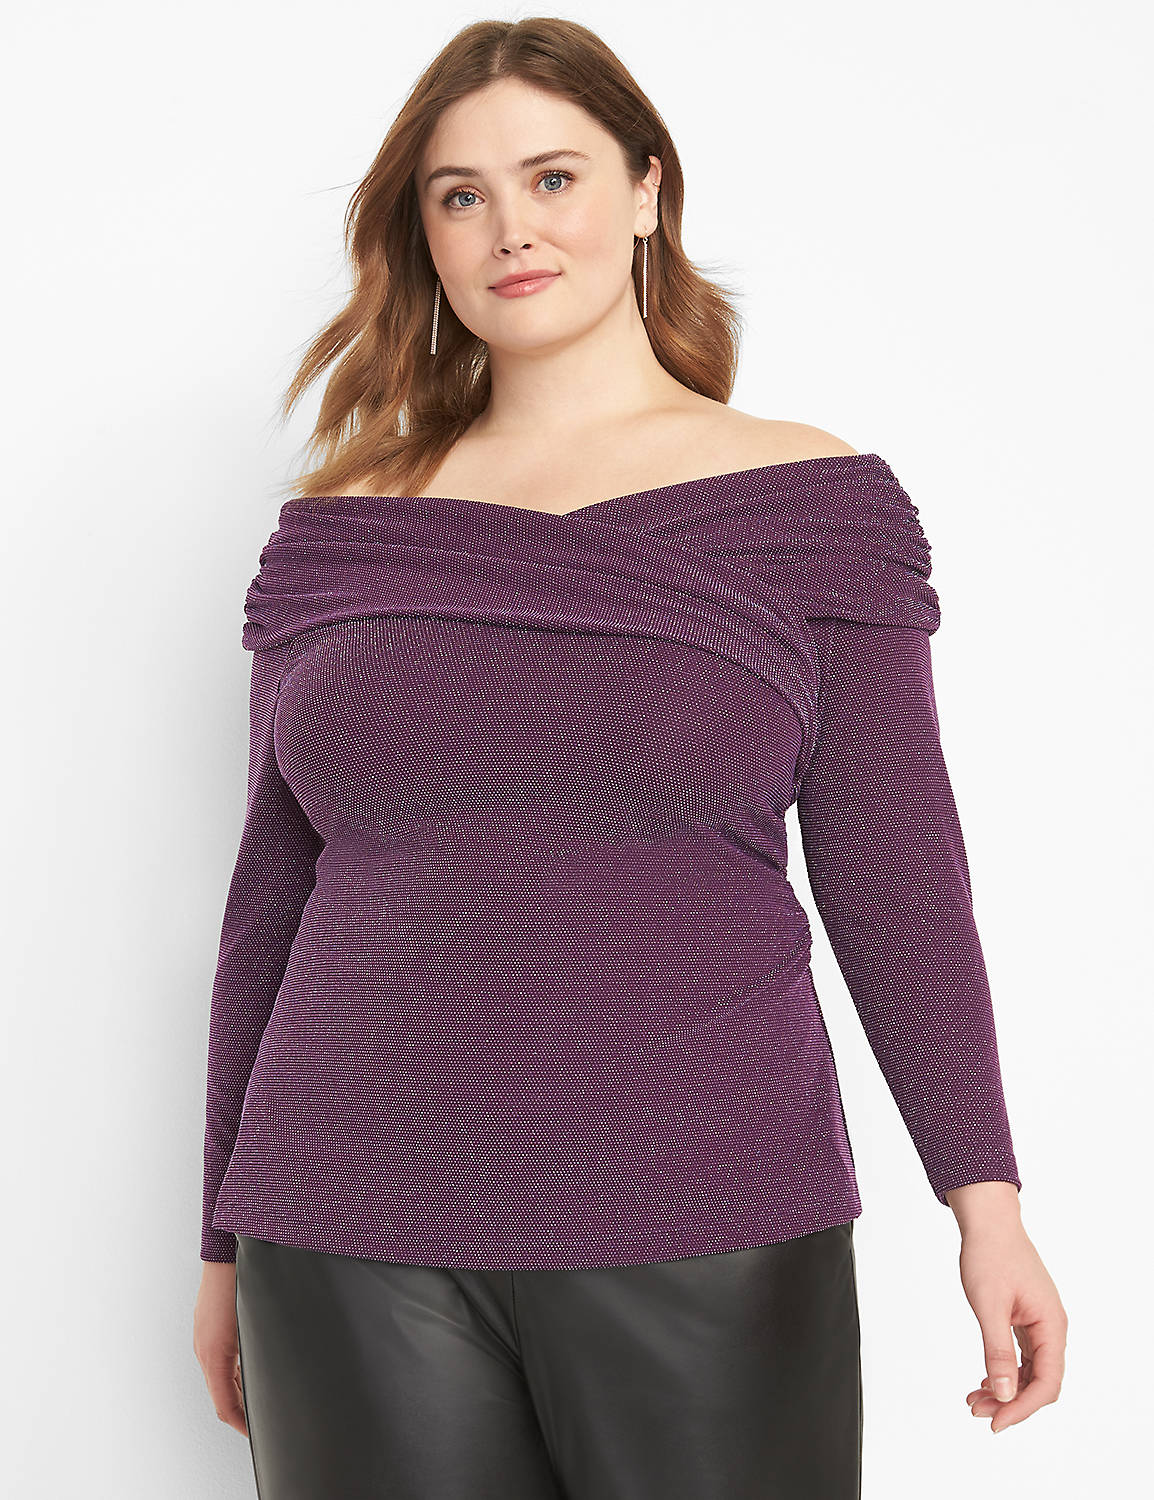 Long Sleeve Off The Shoulder Illusion Silver Lurex Knit Top 1124073:PANTONE Purple Pennant:14/16 Product Image 1